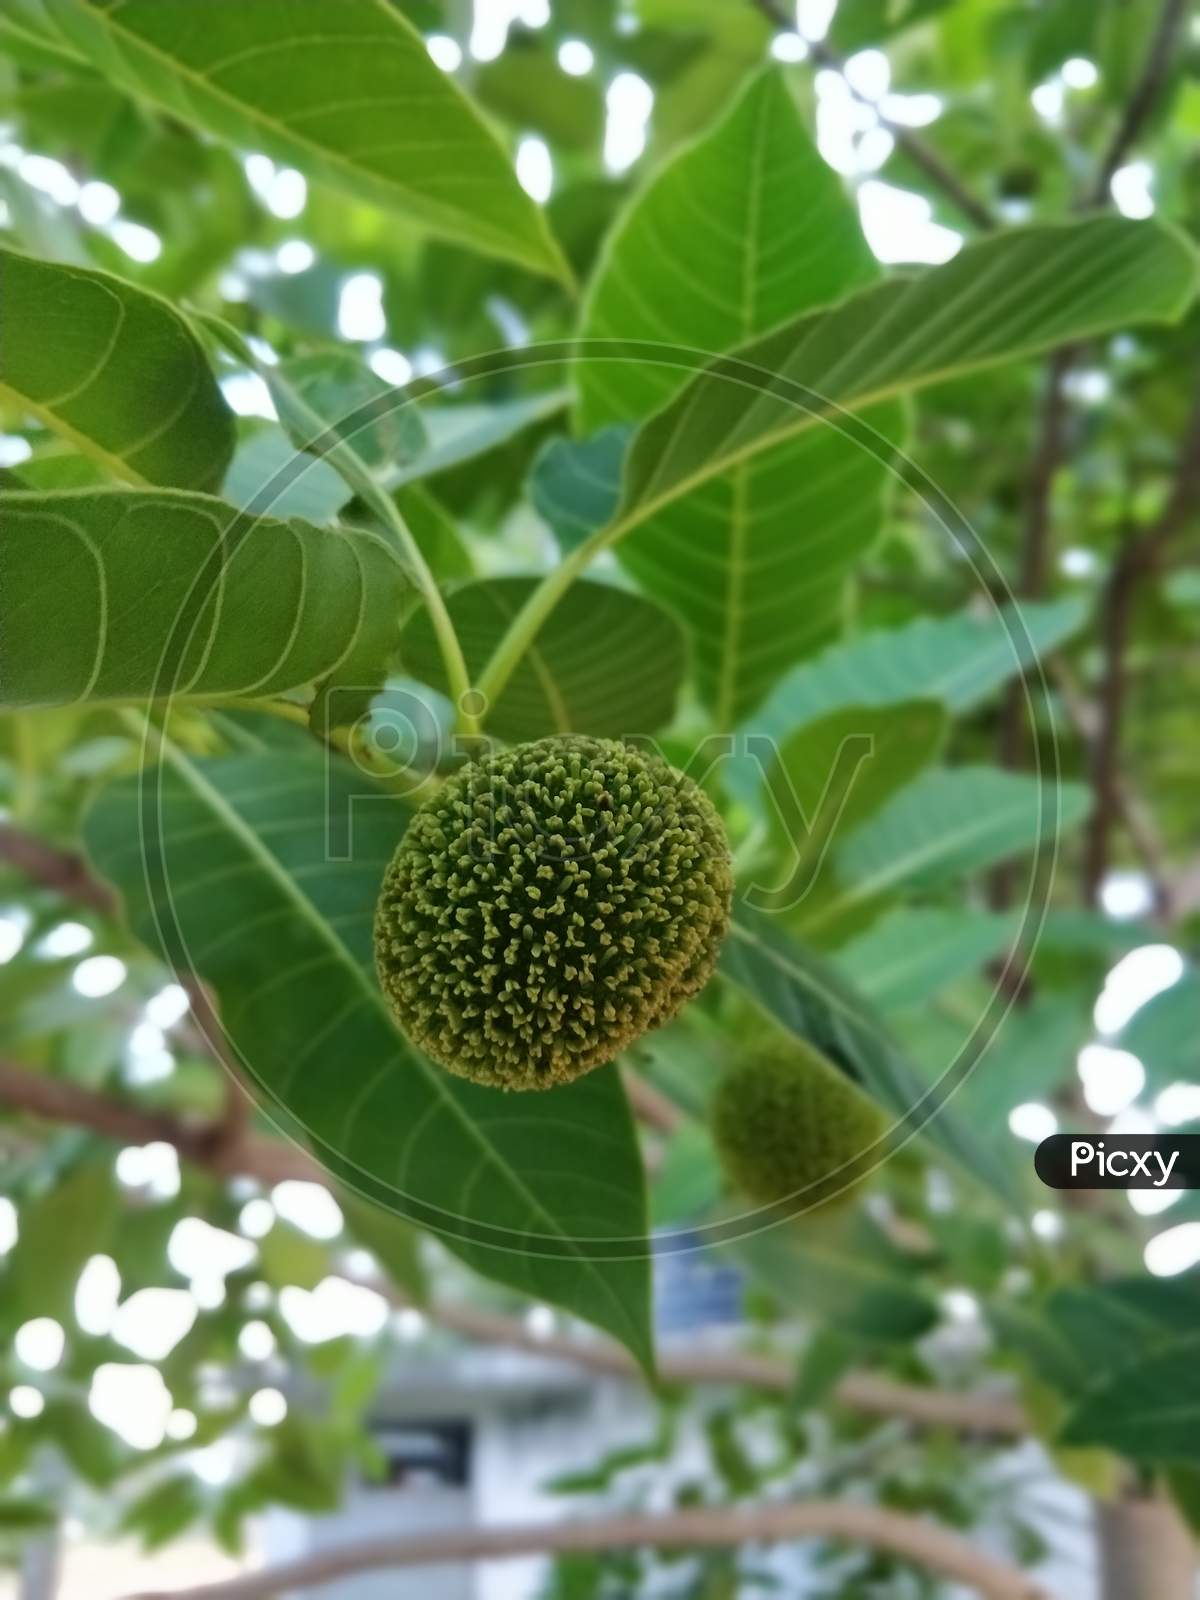 Mulberry fruit in my college